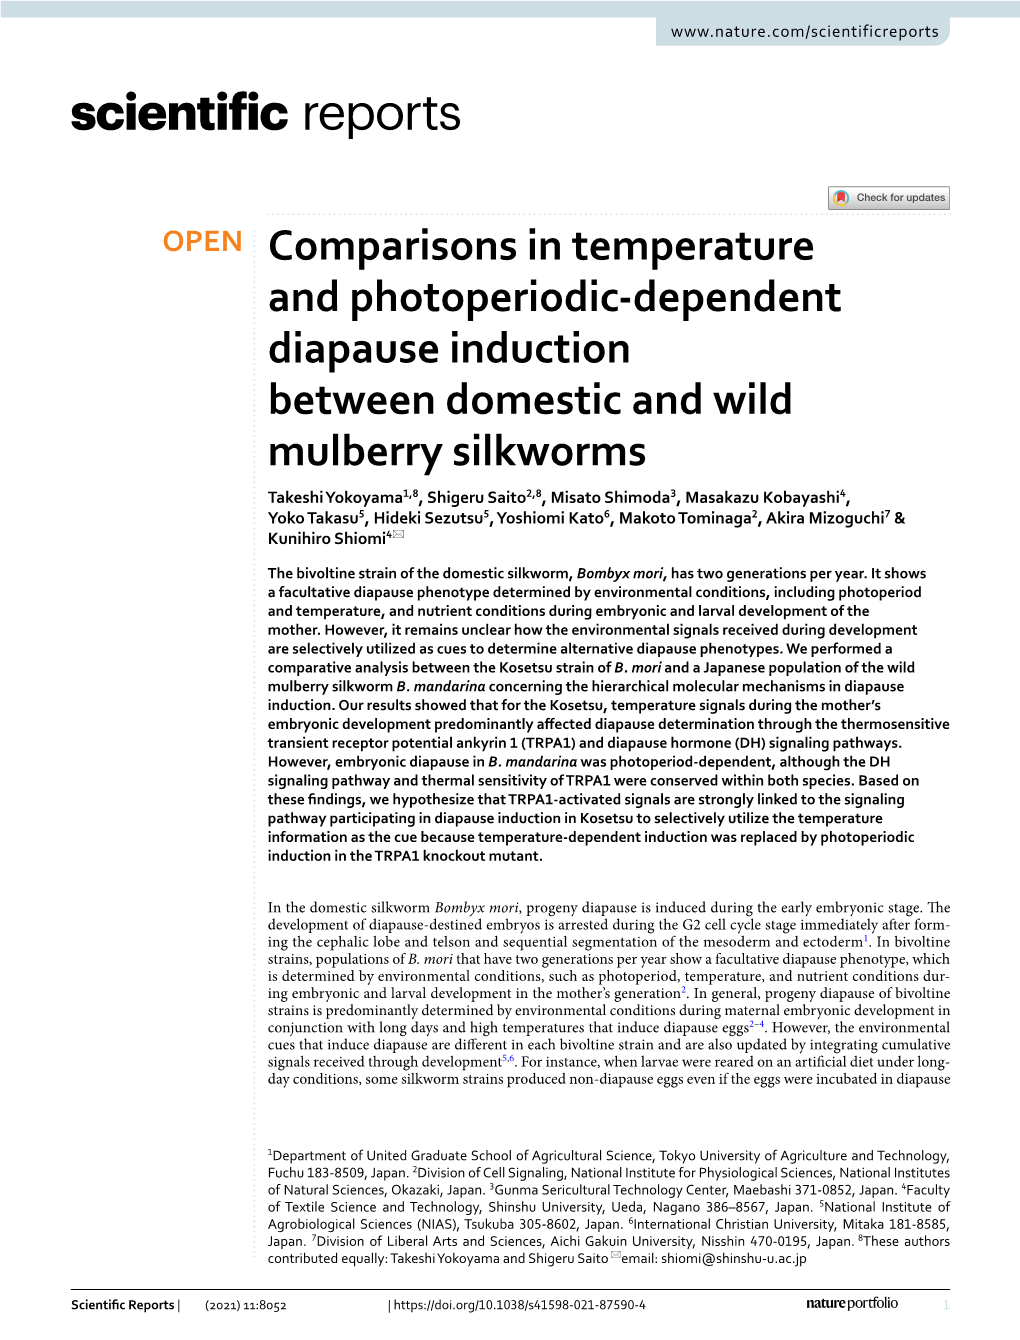 Comparisons in Temperature and Photoperiodic-Dependent Diapause